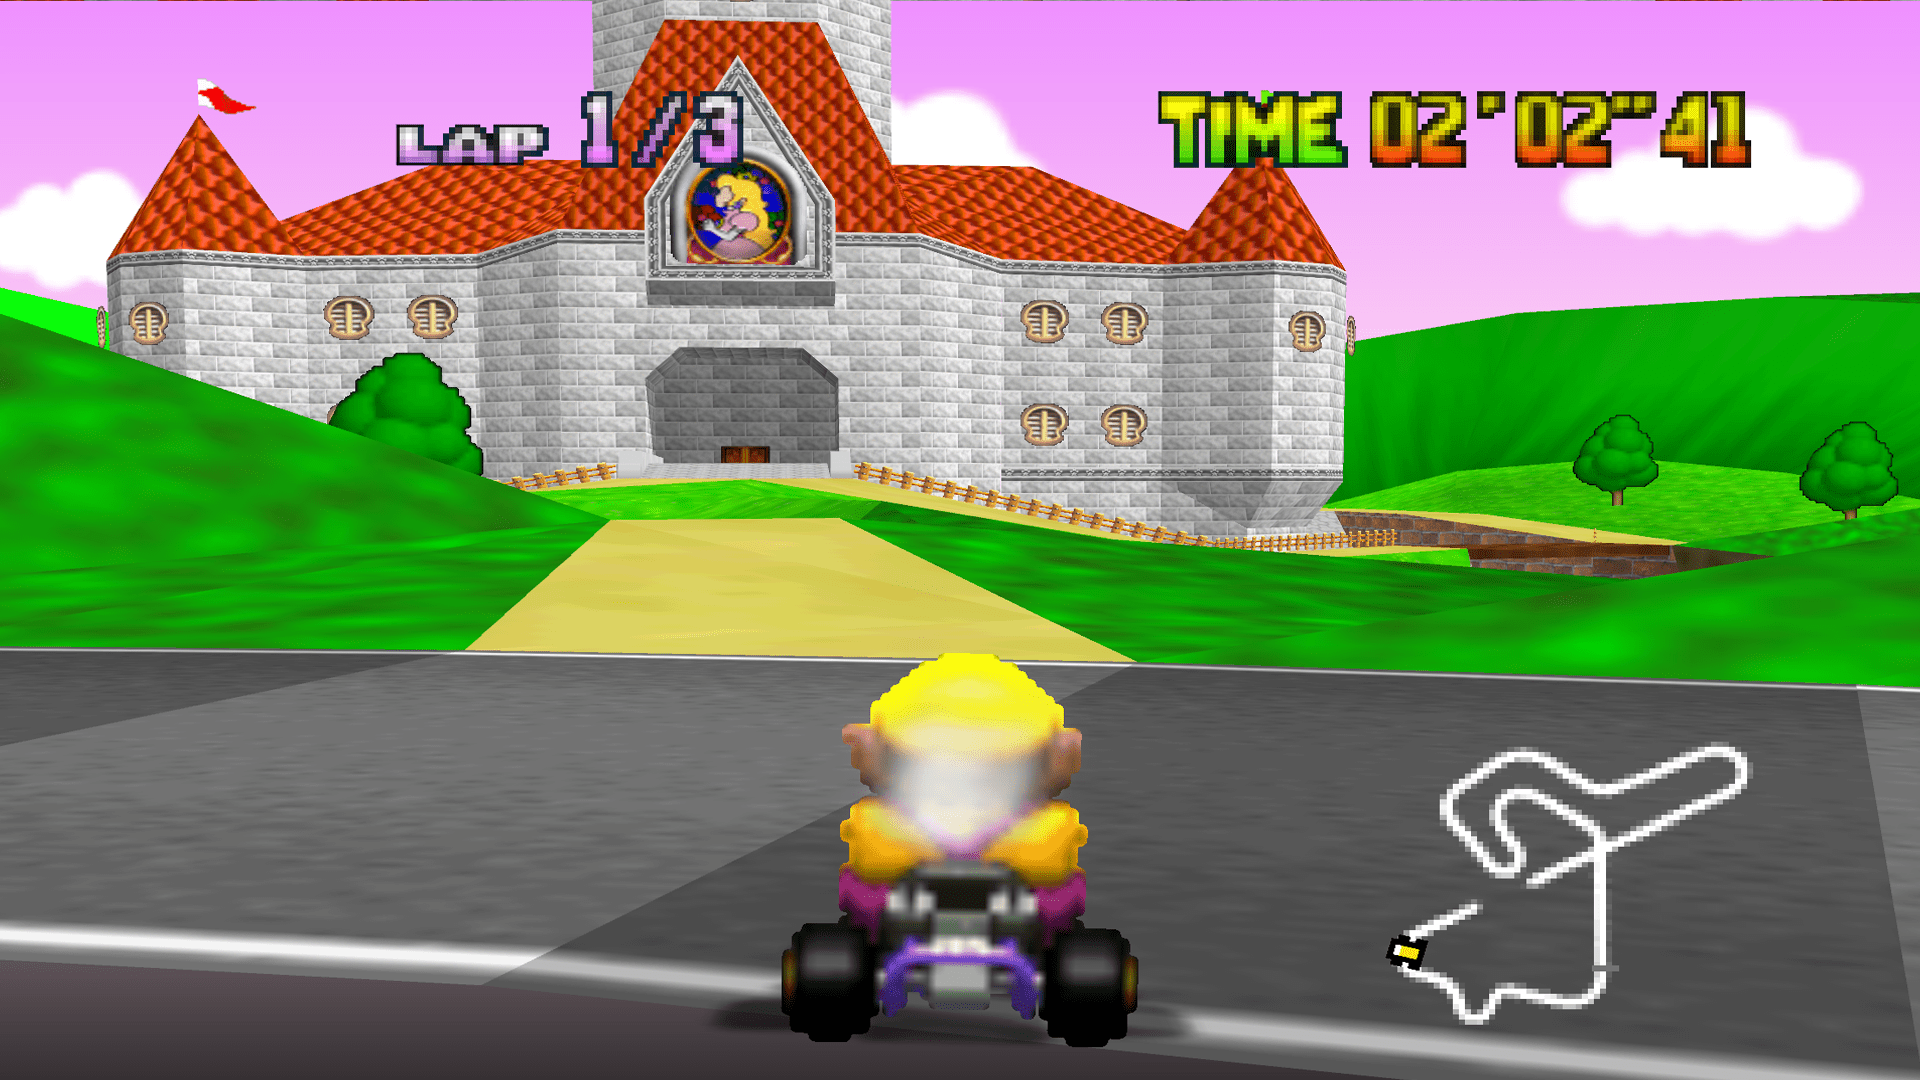 Erfaren person Tæmme tørre Mario Kart 64 is still a pioneering racing game 25 years on | Traxion